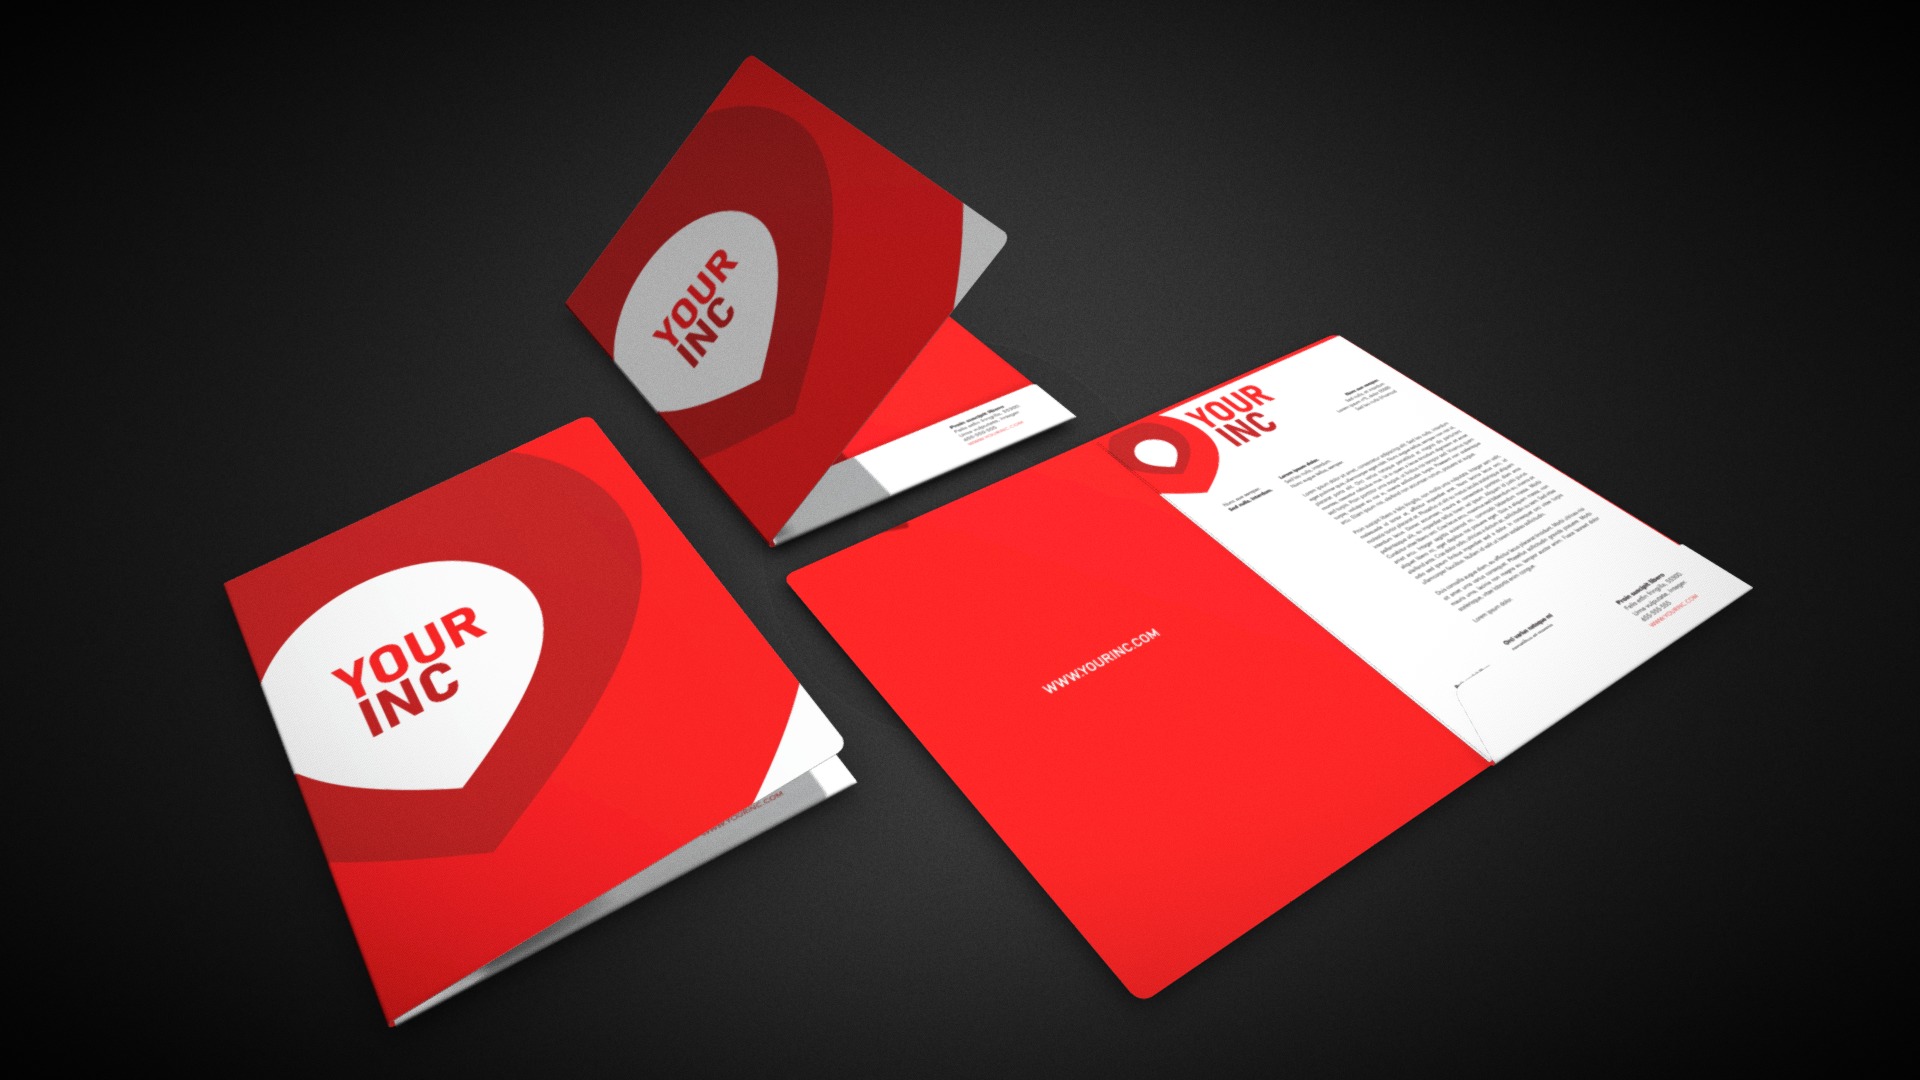 3D model Flap folder pack - This is a 3D model of the Flap folder pack. The 3D model is about a red and white card.